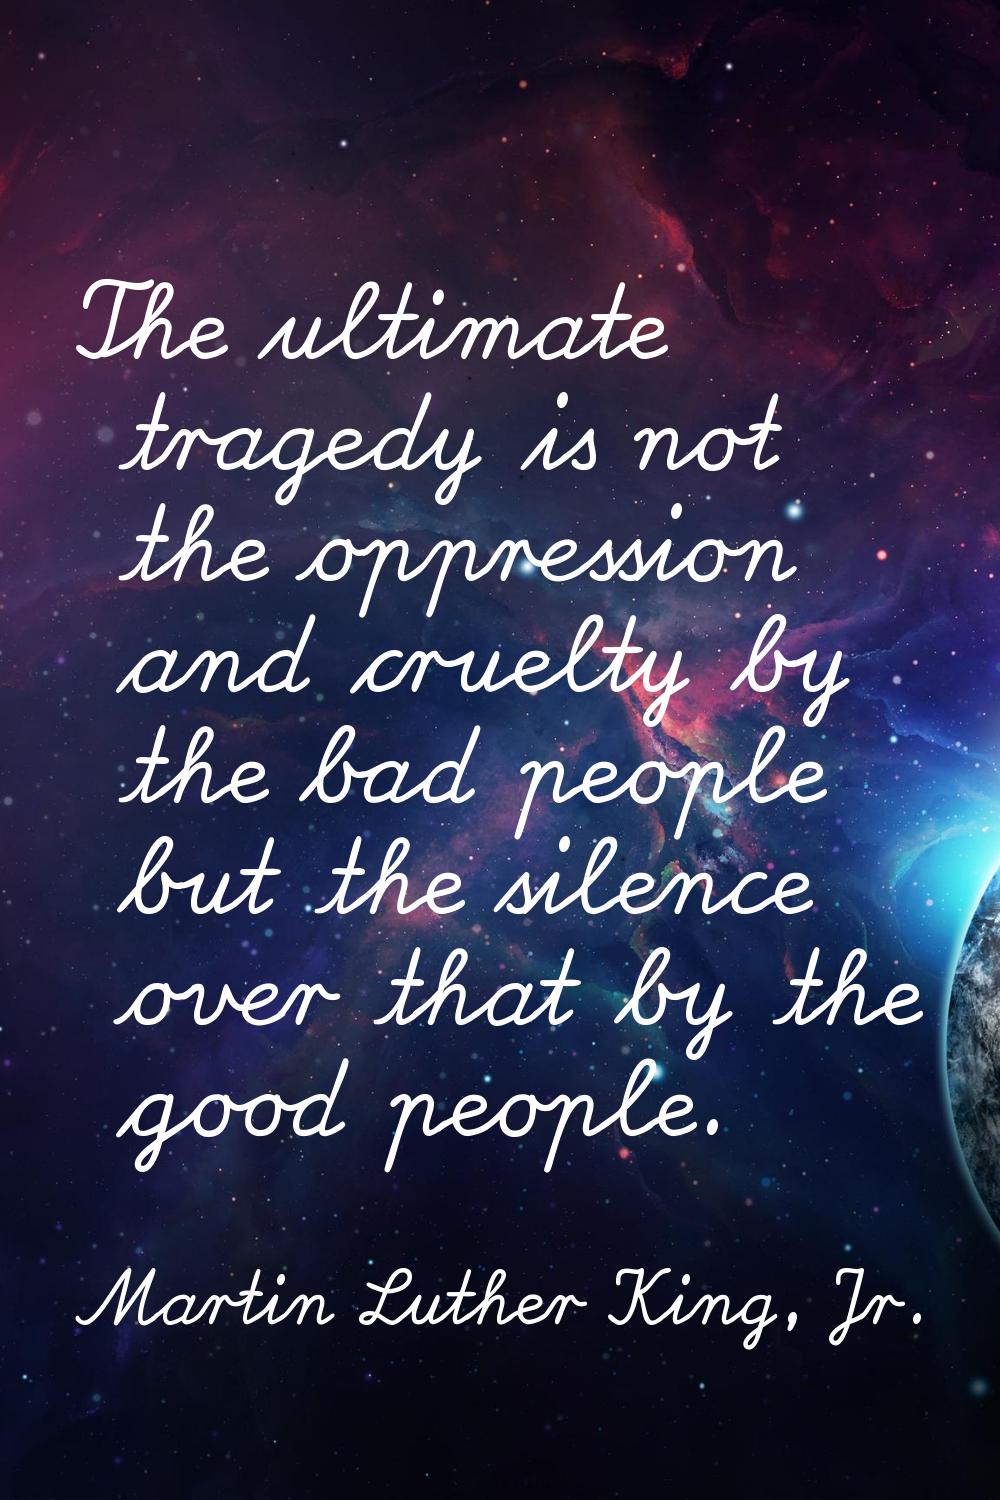 The ultimate tragedy is not the oppression and cruelty by the bad people but the silence over that 